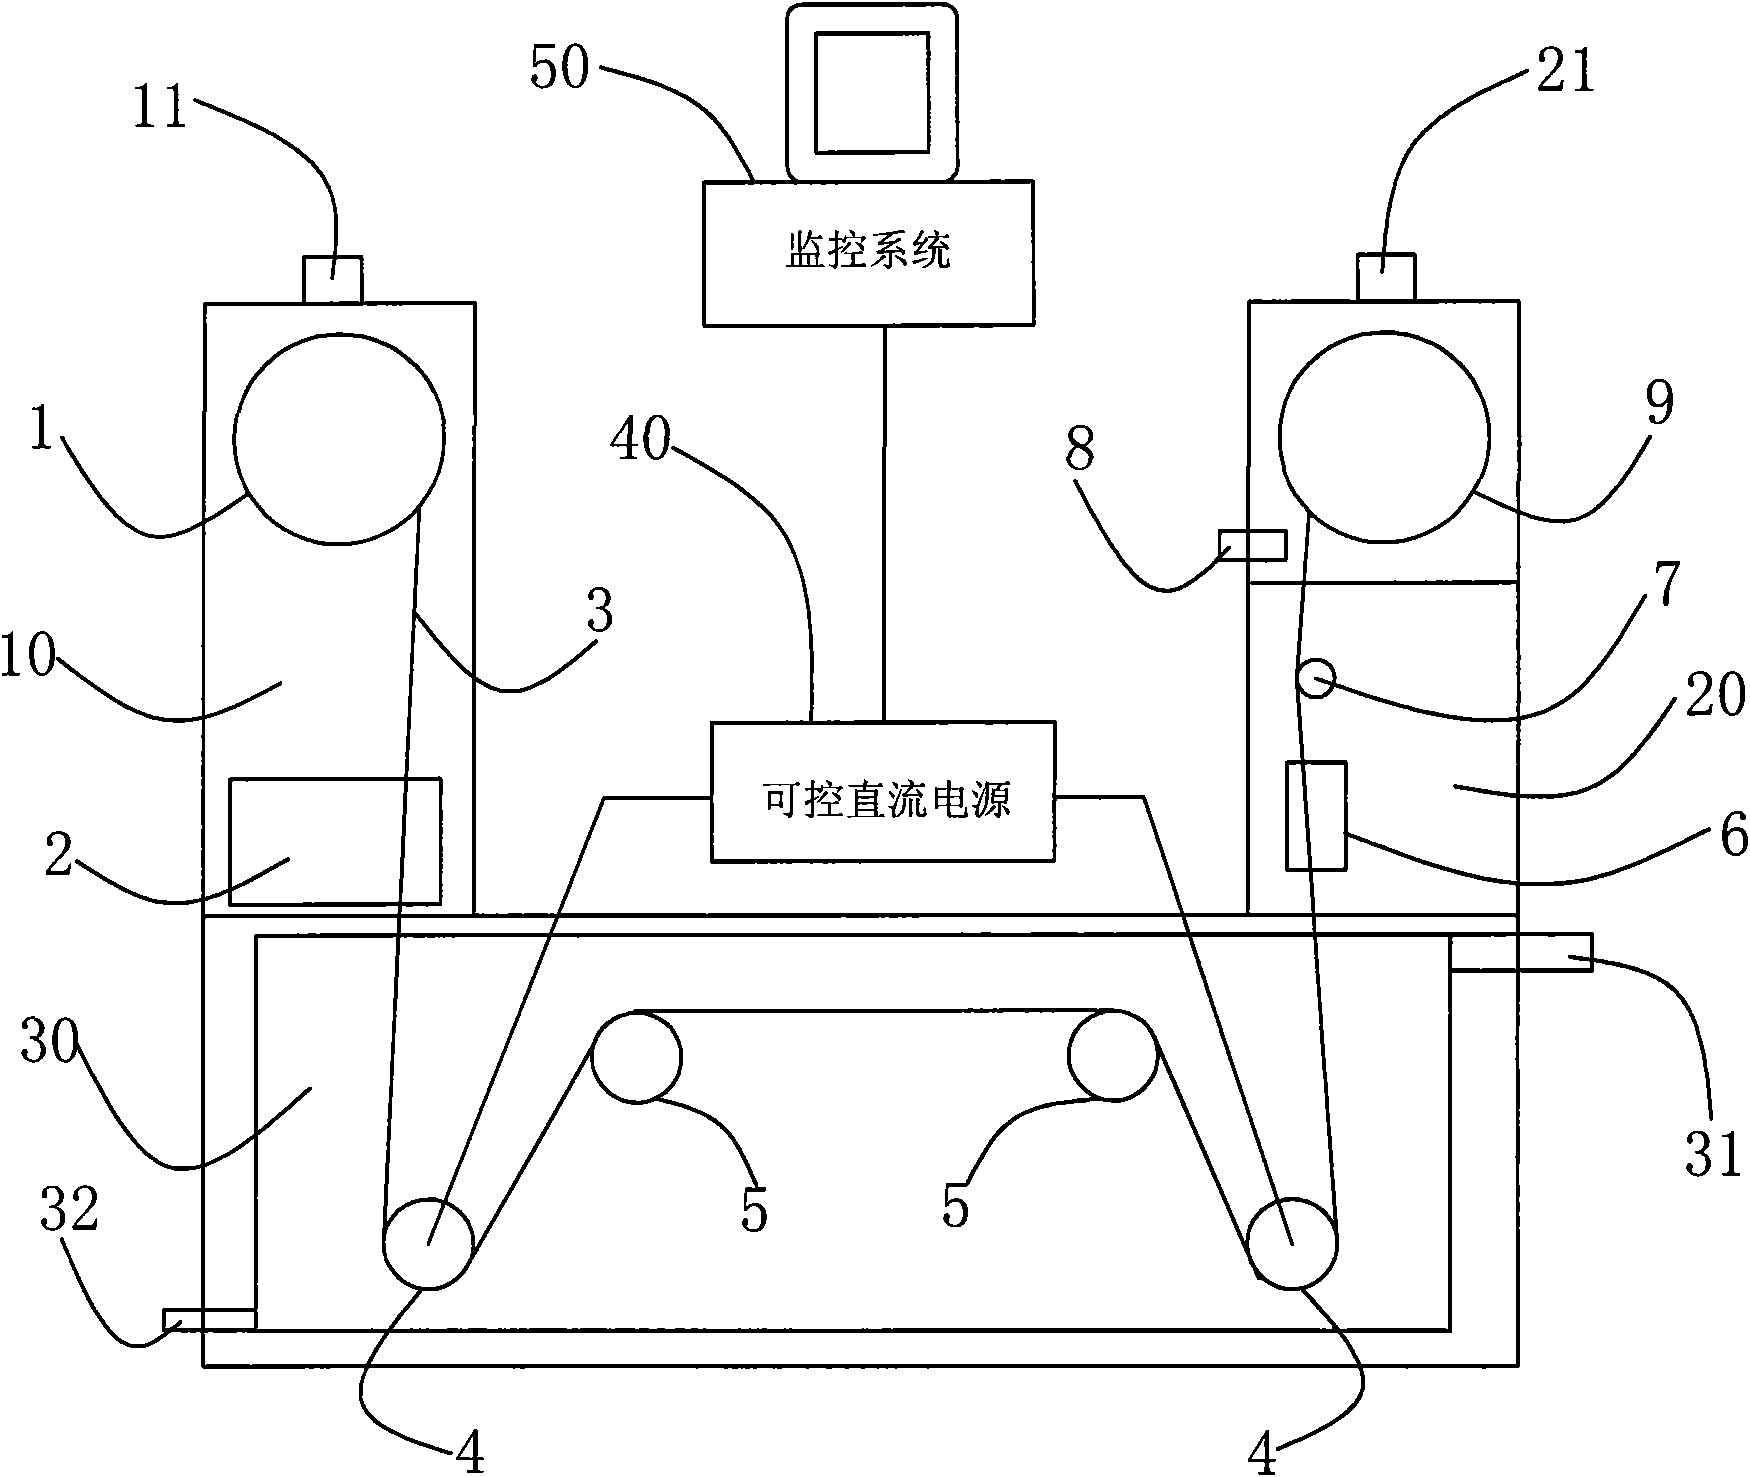 High-temperature superconductive long tape critical current continuous measurement and rewinding device